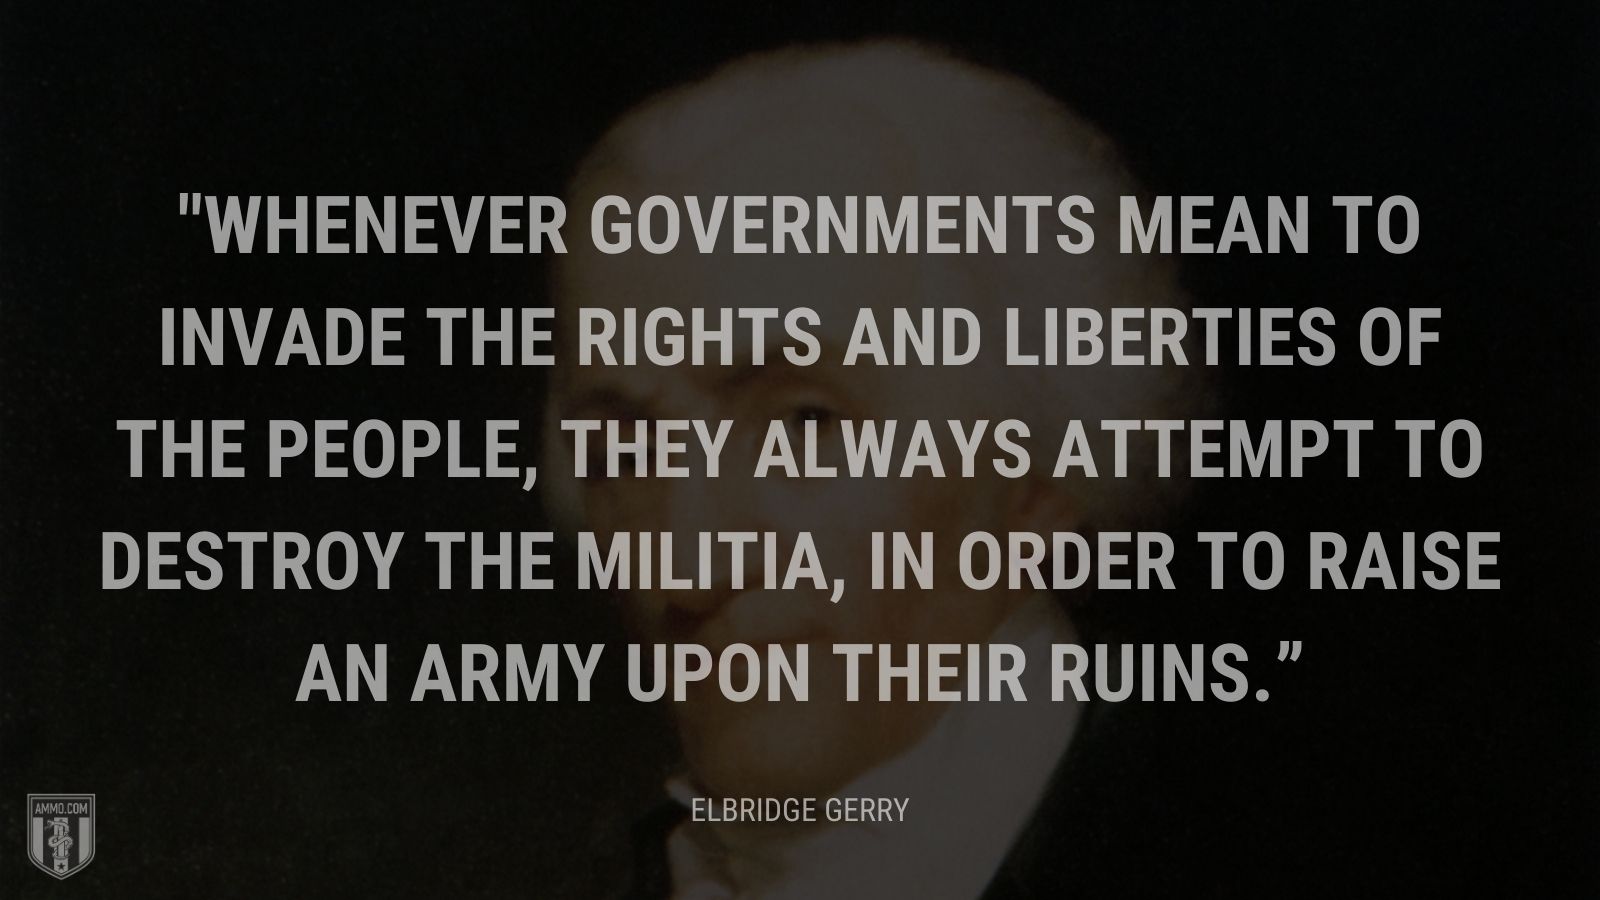 “Whenever governments mean to invade the rights and liberties of the people, they always attempt to destroy the militia, in order to raise an army upon their ruins.” - Representative Elbridge Gerry